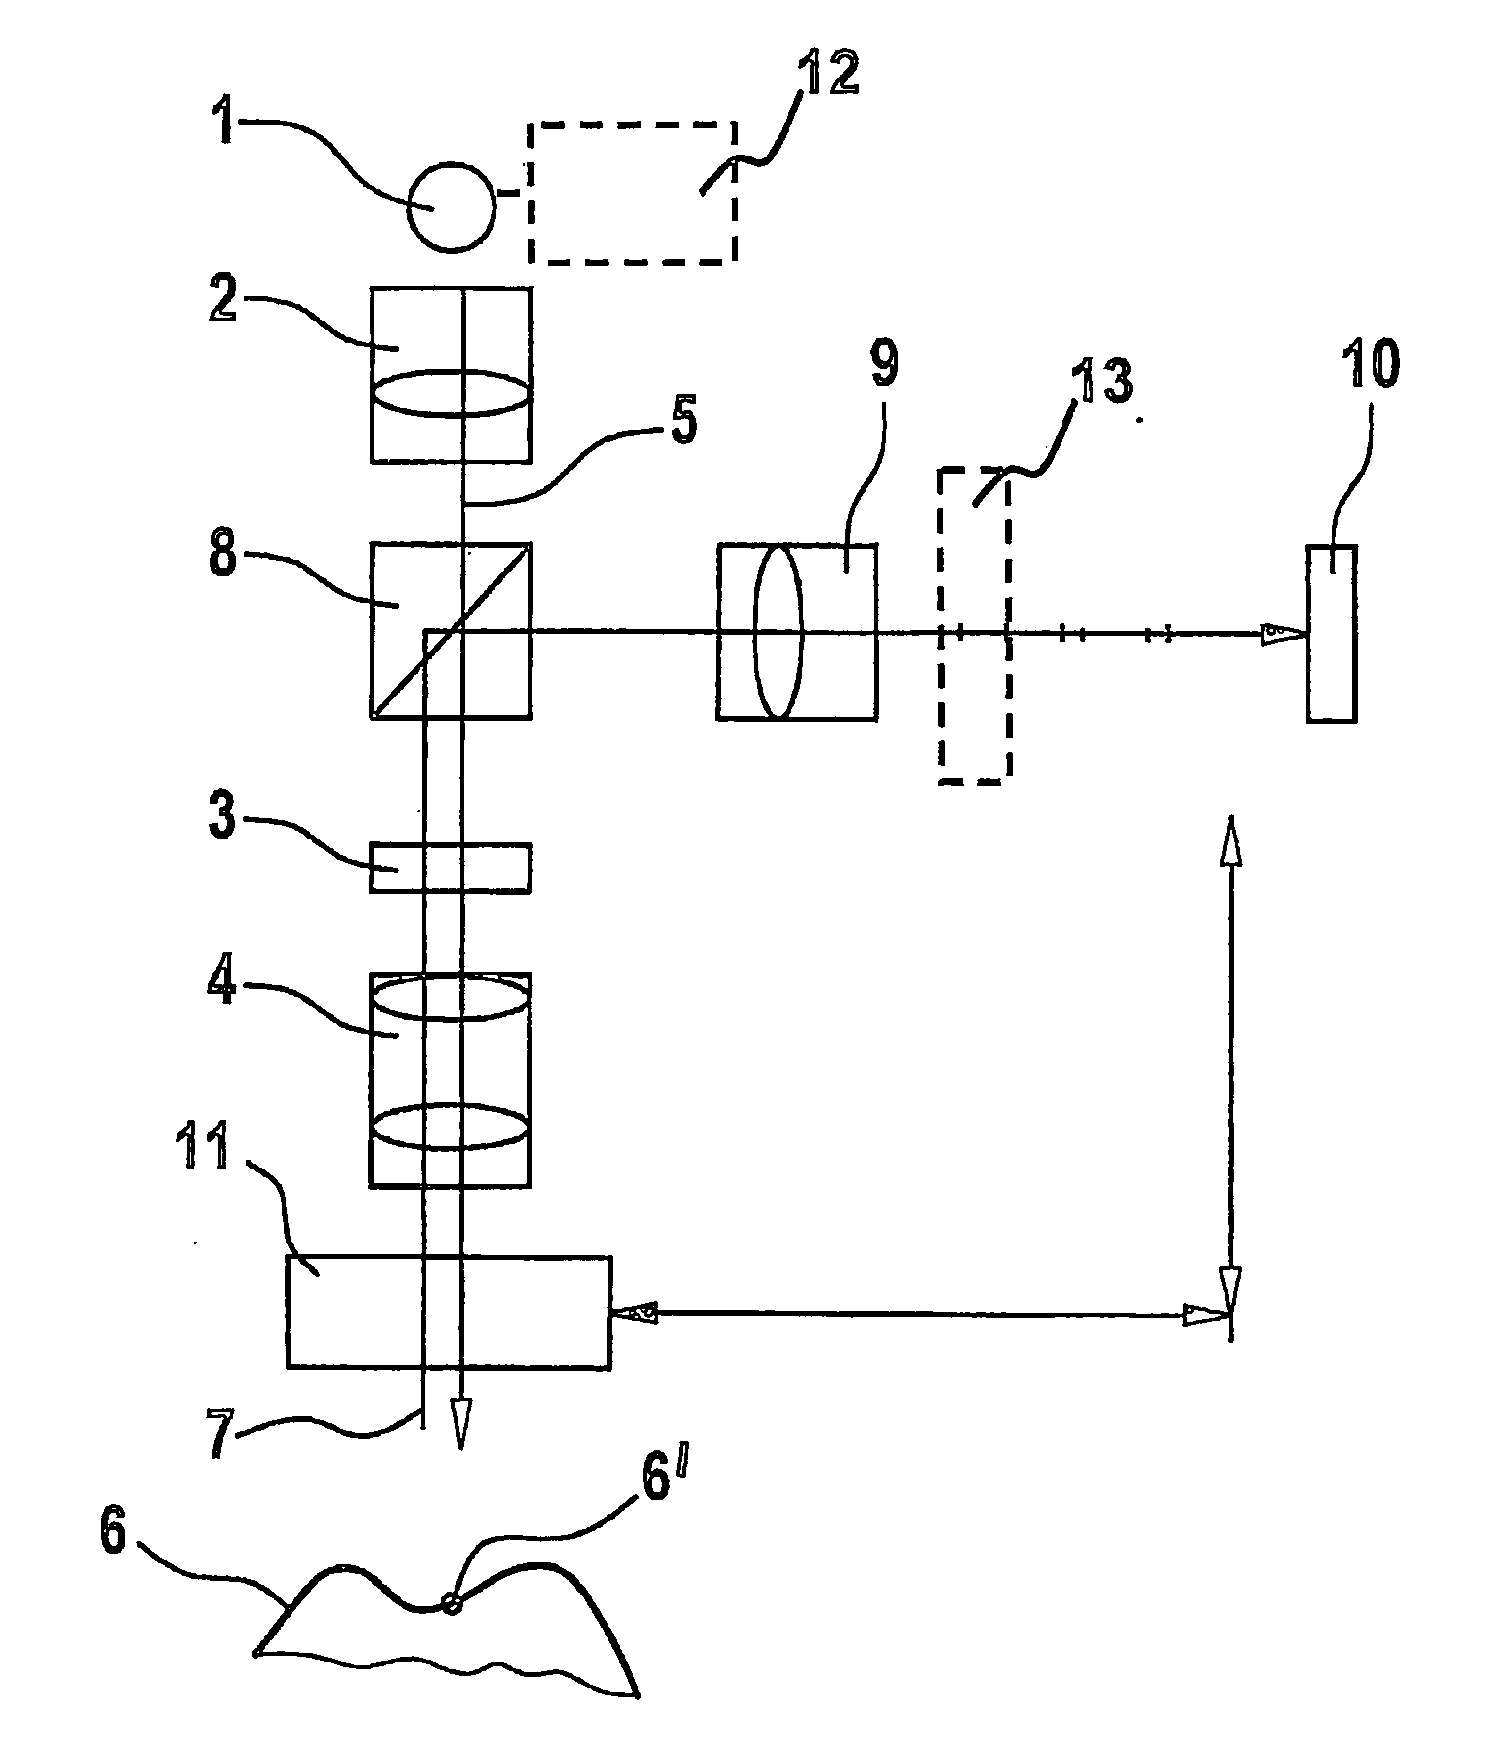 Measuring Device and Method That Operates According to the Basic Principles of Confocal Microscopy